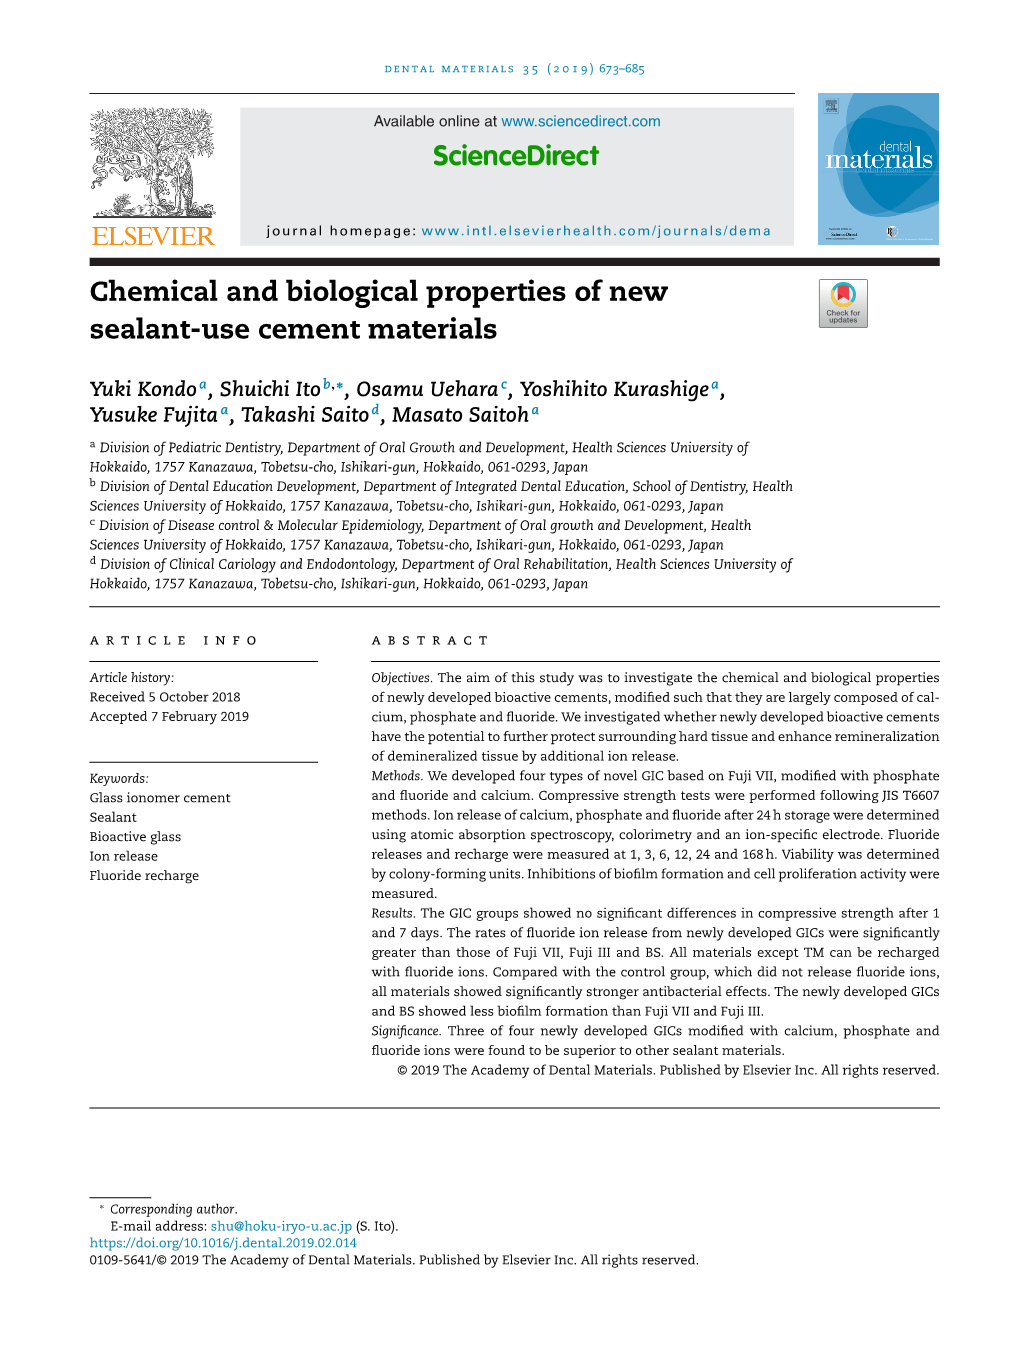 Chemical and Biological Properties of New Sealant-Use Cement Materials